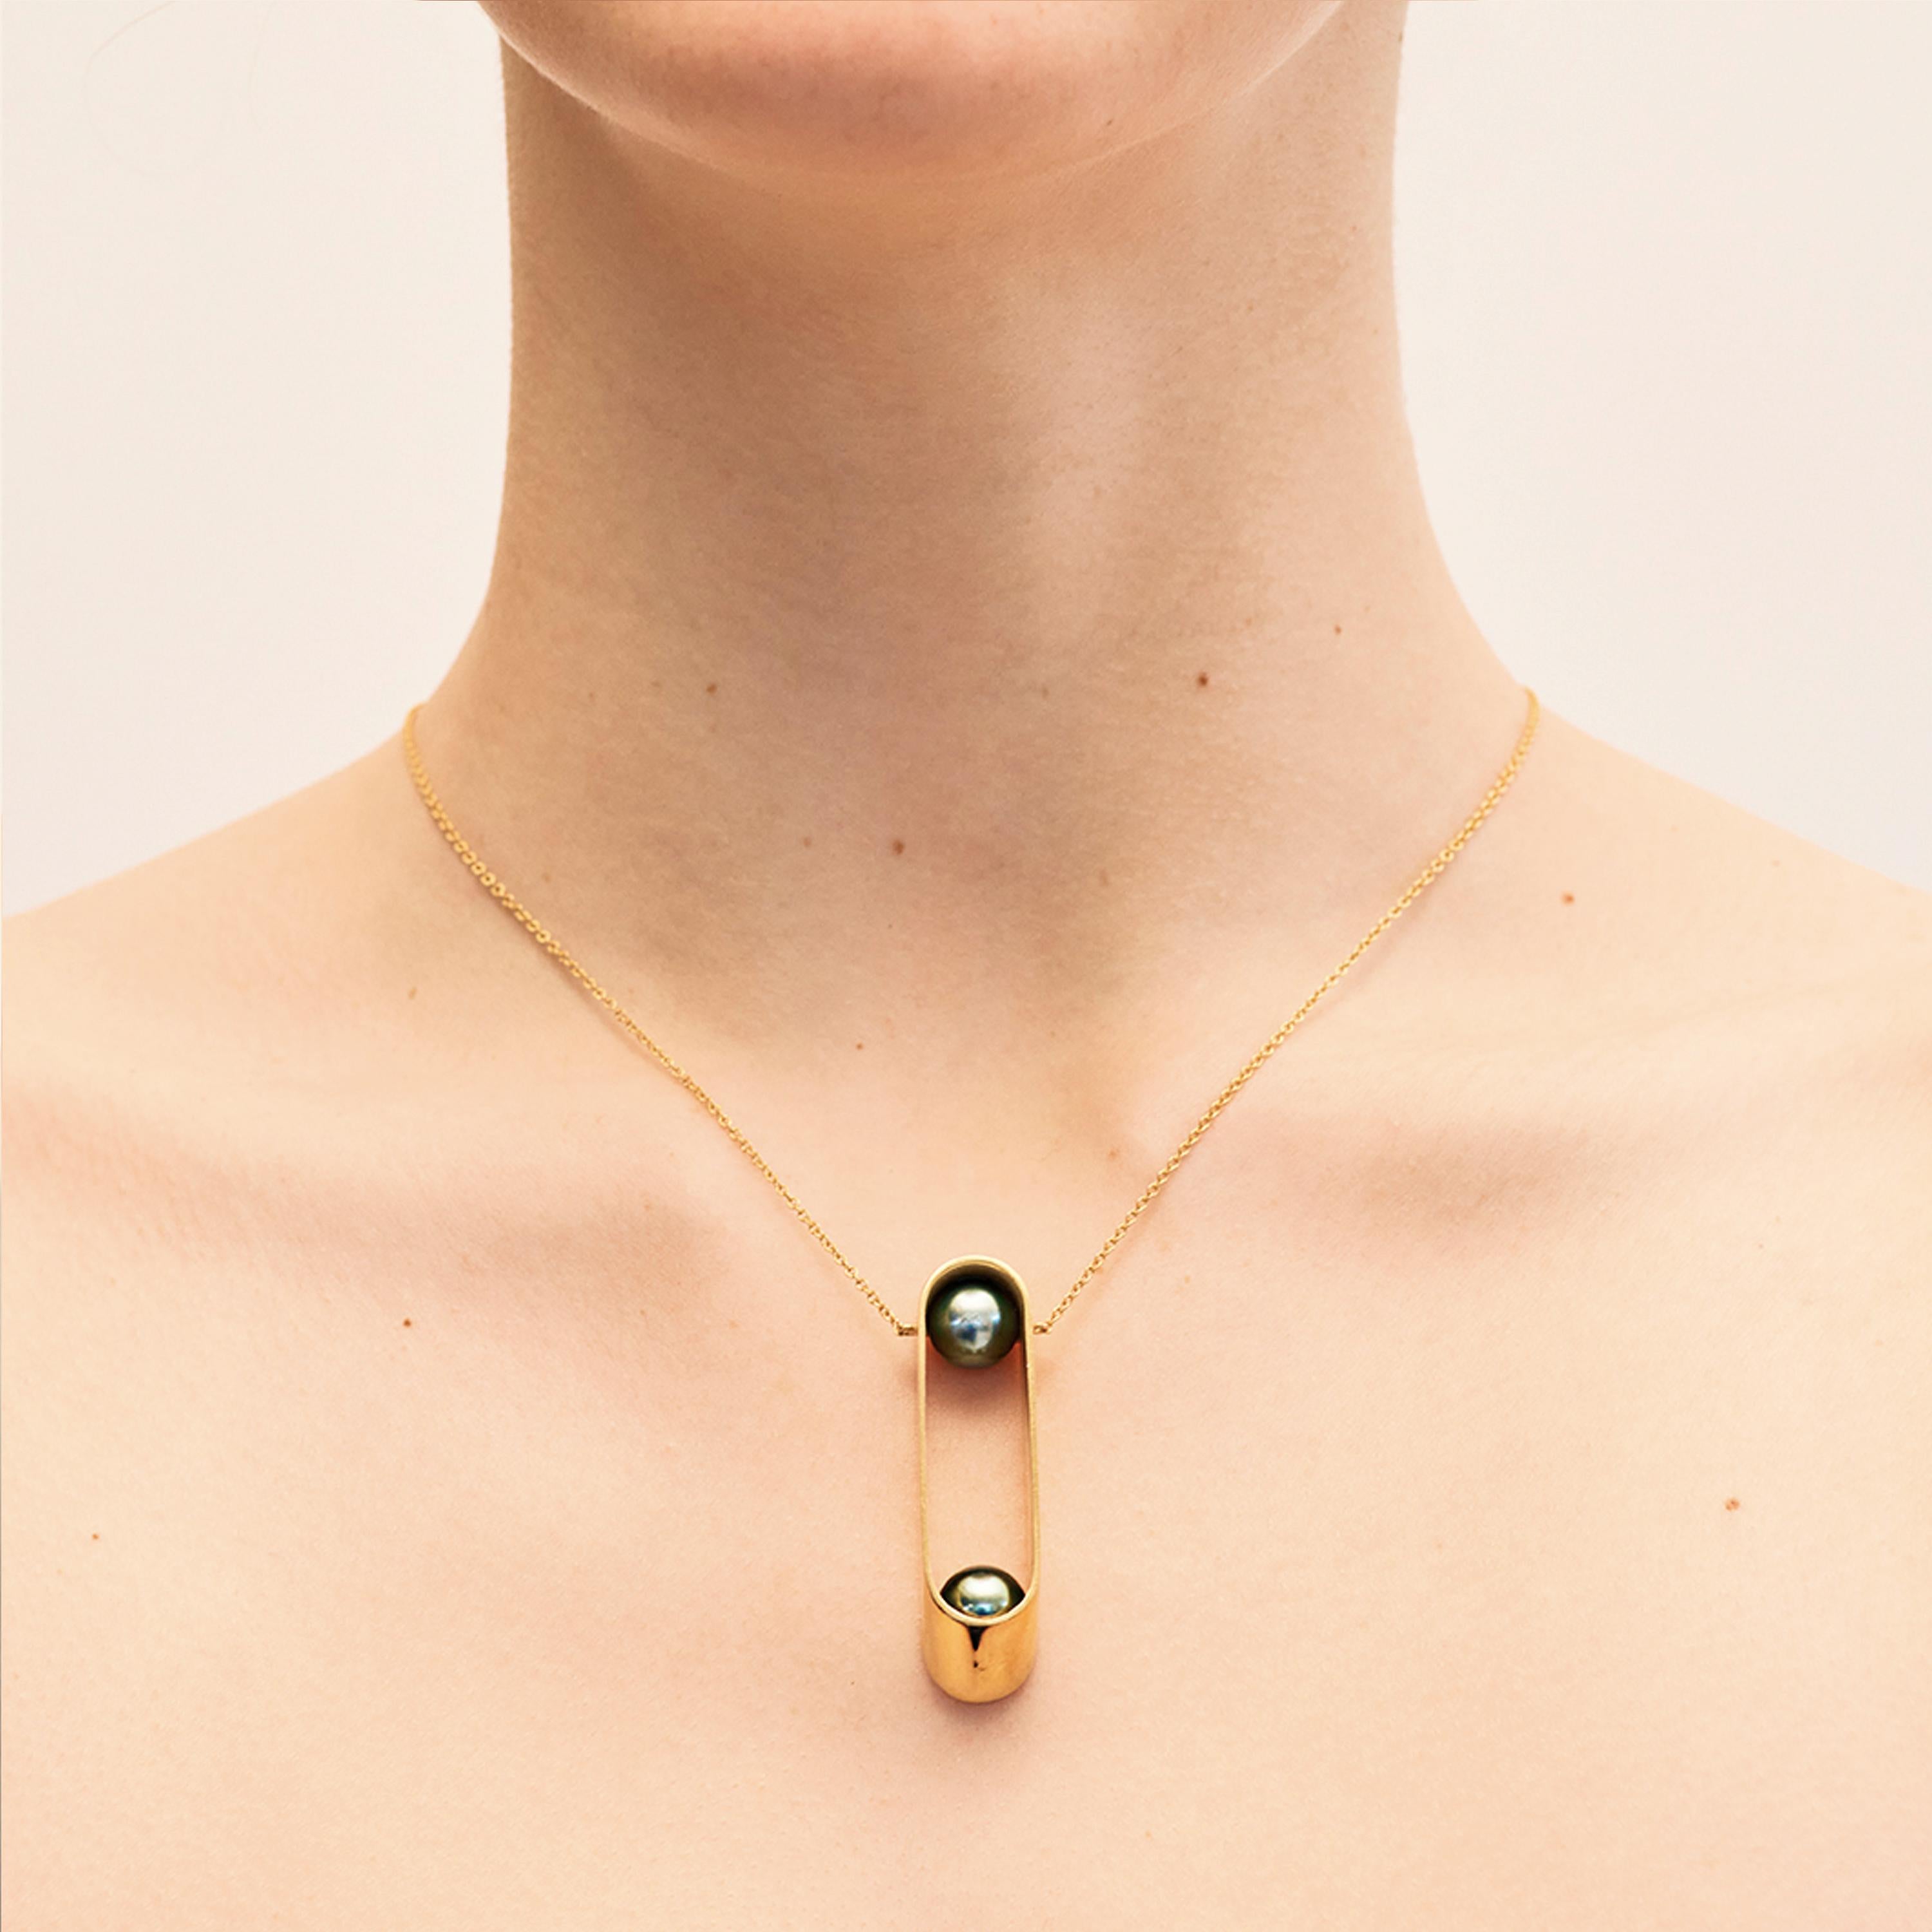 Yael Sonia’s Ellipse Brilliant Necklace is crafted from rhodium plated 18 karat white gold and diamonds (0.04ct). Stationed at opposite ends, two iridescent 8mm Tahitian pearls lend an air of elegance to the sleek elliptical gold pendant. This